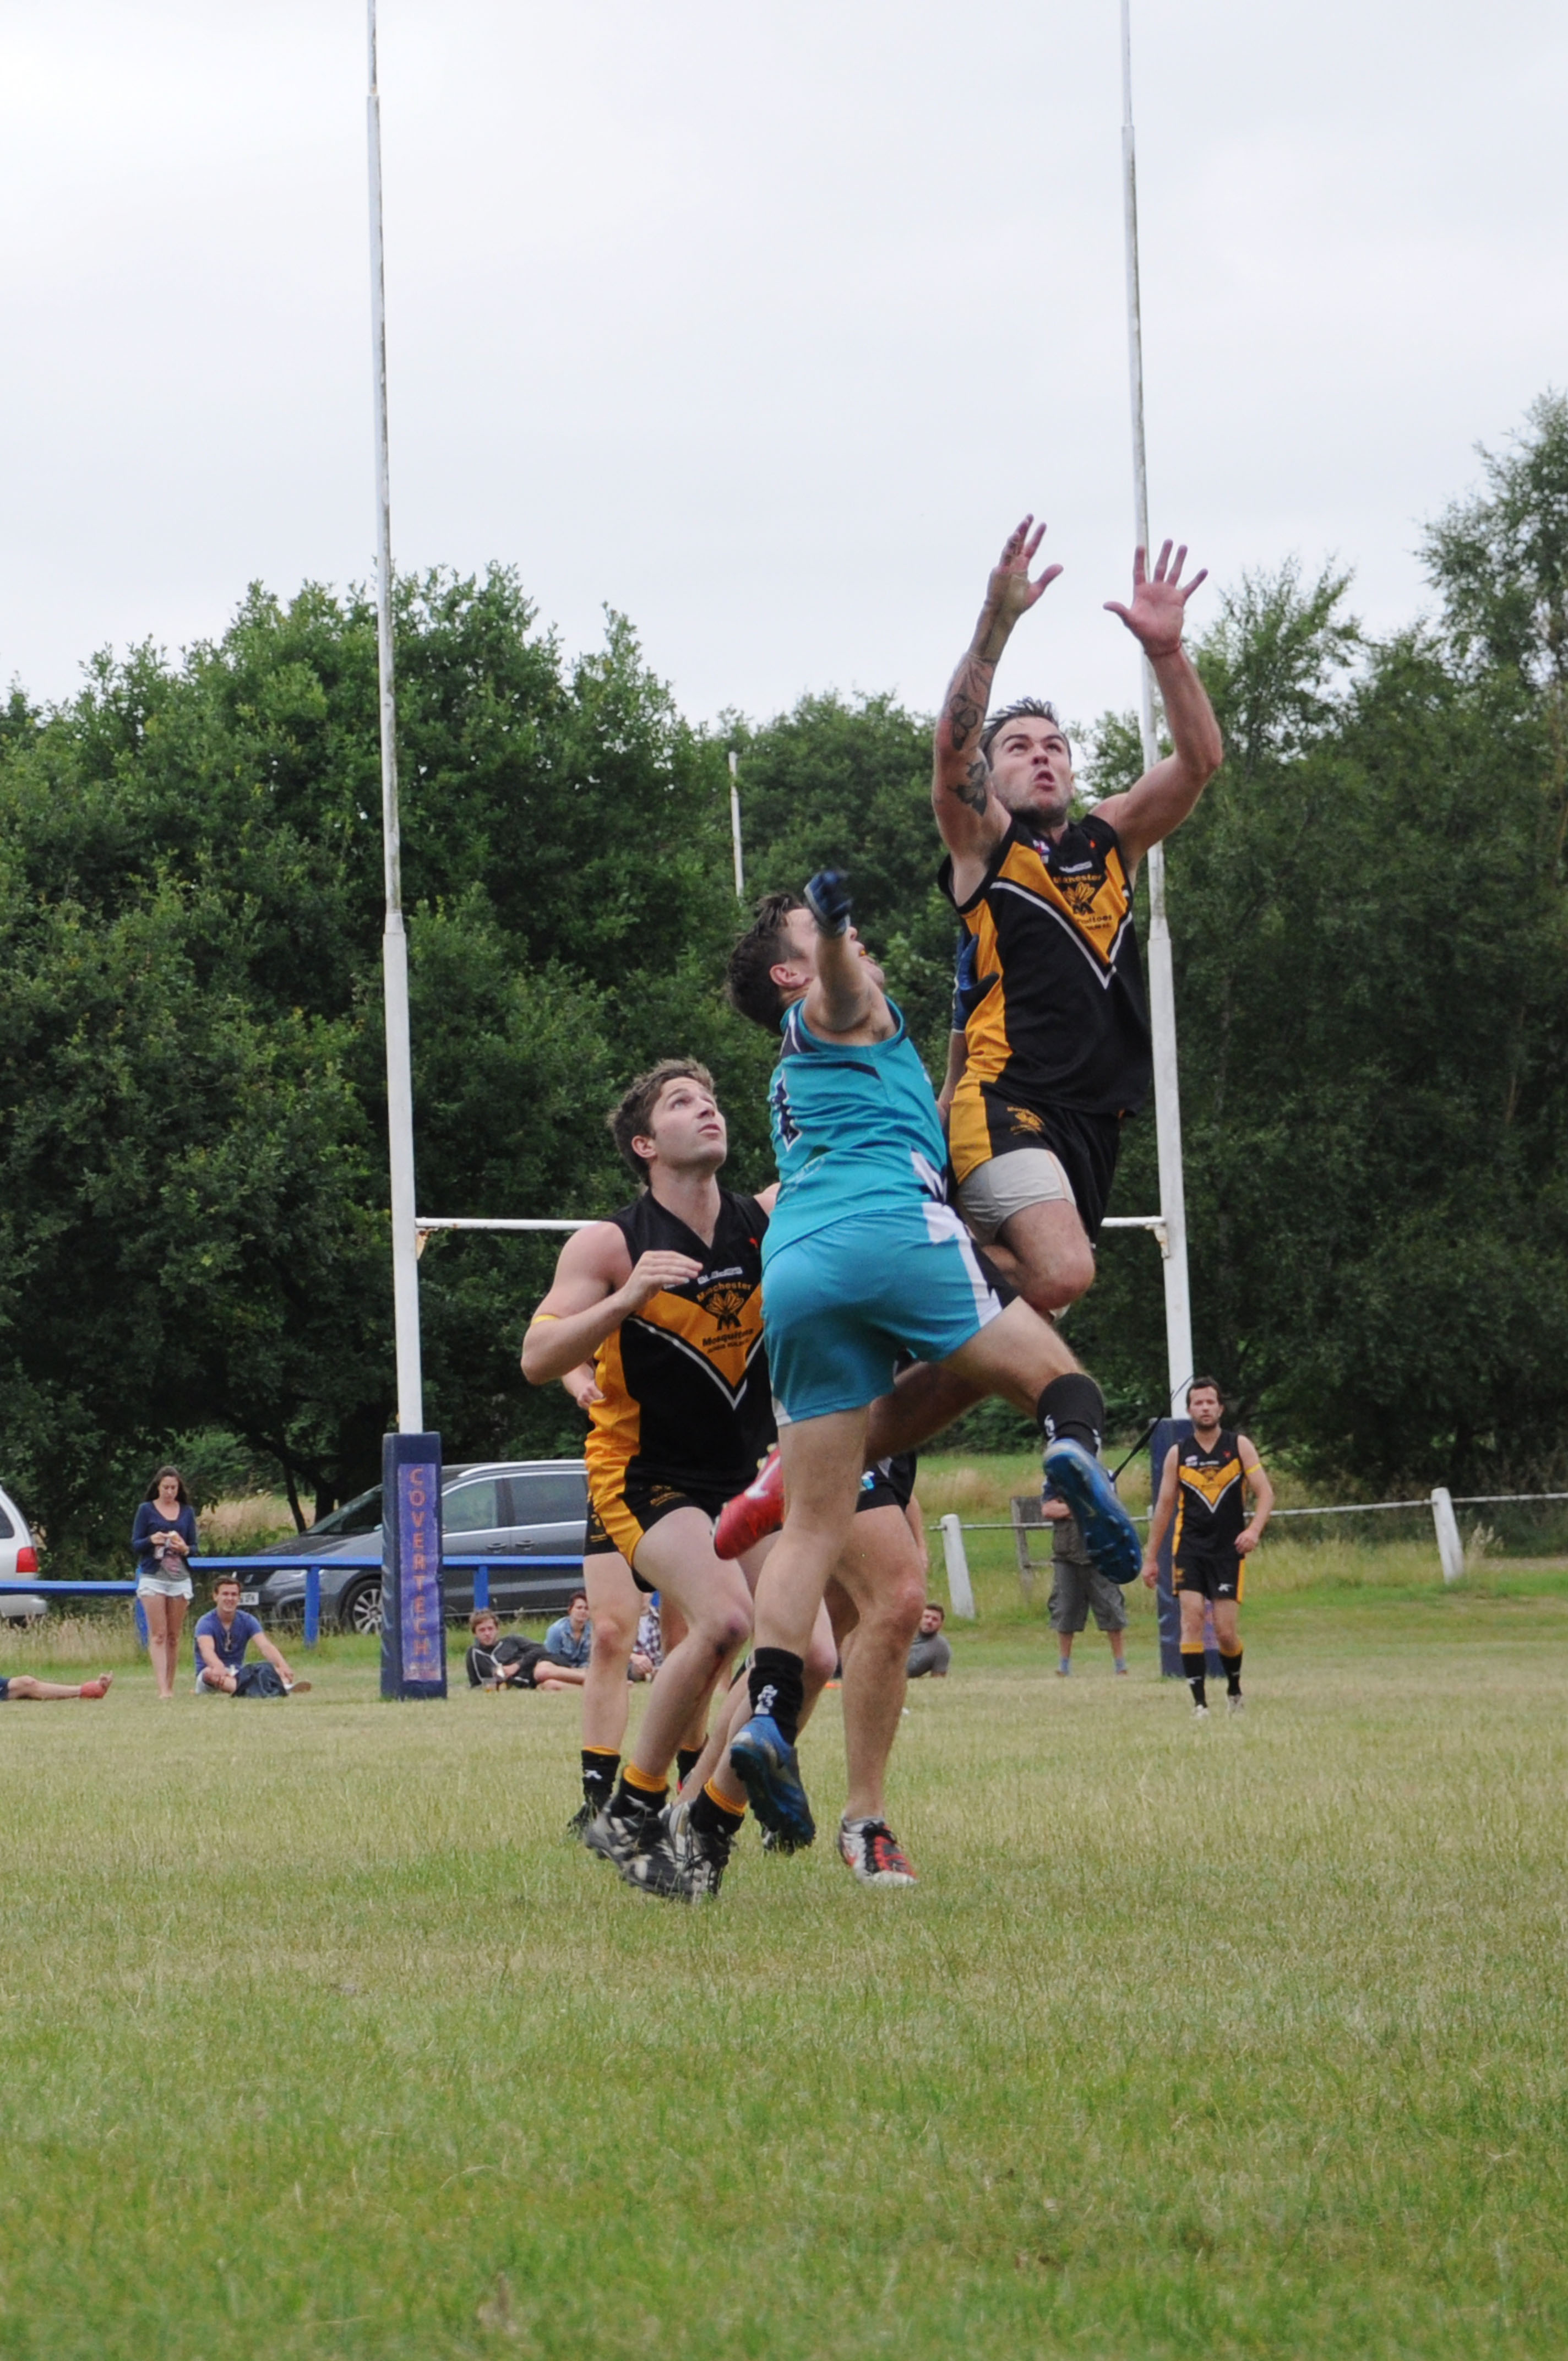 Aussie Rules Football in Manchester